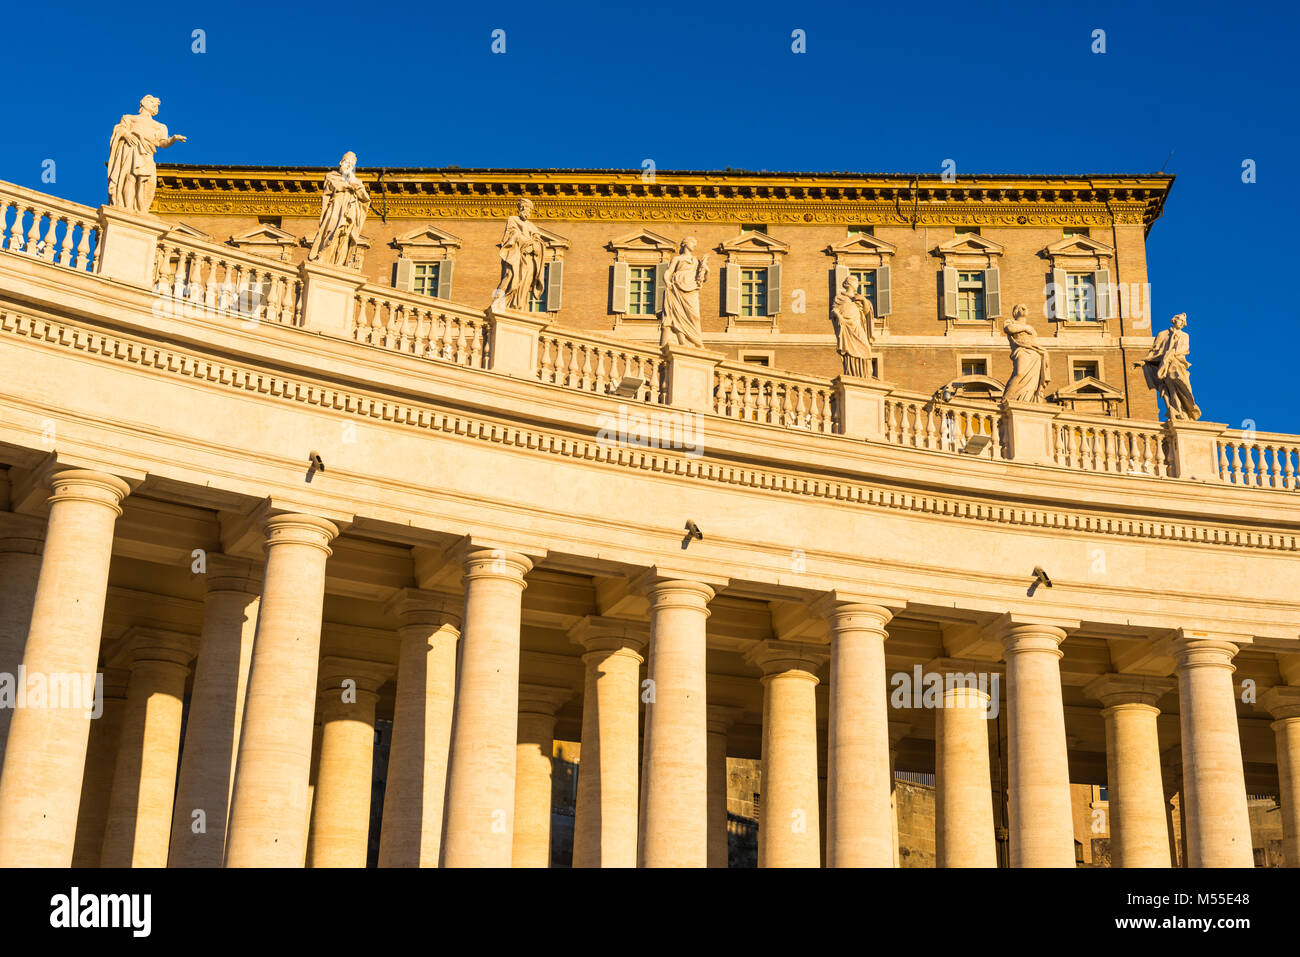 Vatican palace, residence of the Pope and statues in early morning seen from St Peter's Square. Rome. Lazio, Italy. Stock Photo